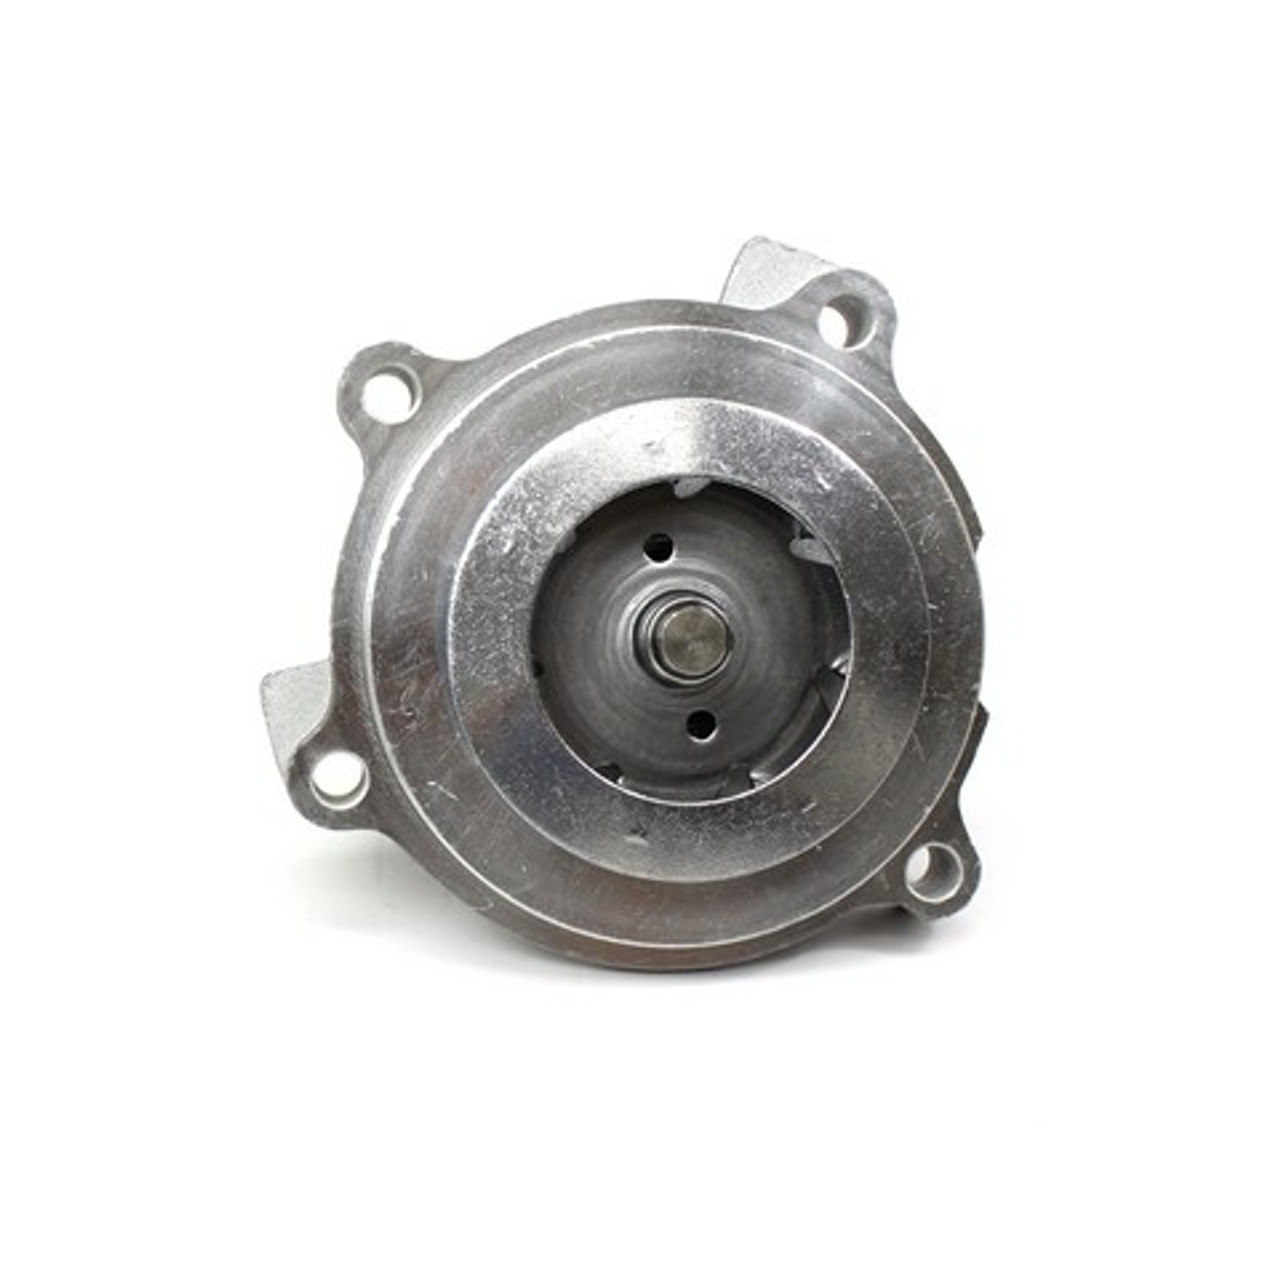 Water Pump 4.6L 2001 Ford Mustang - WP4136.15